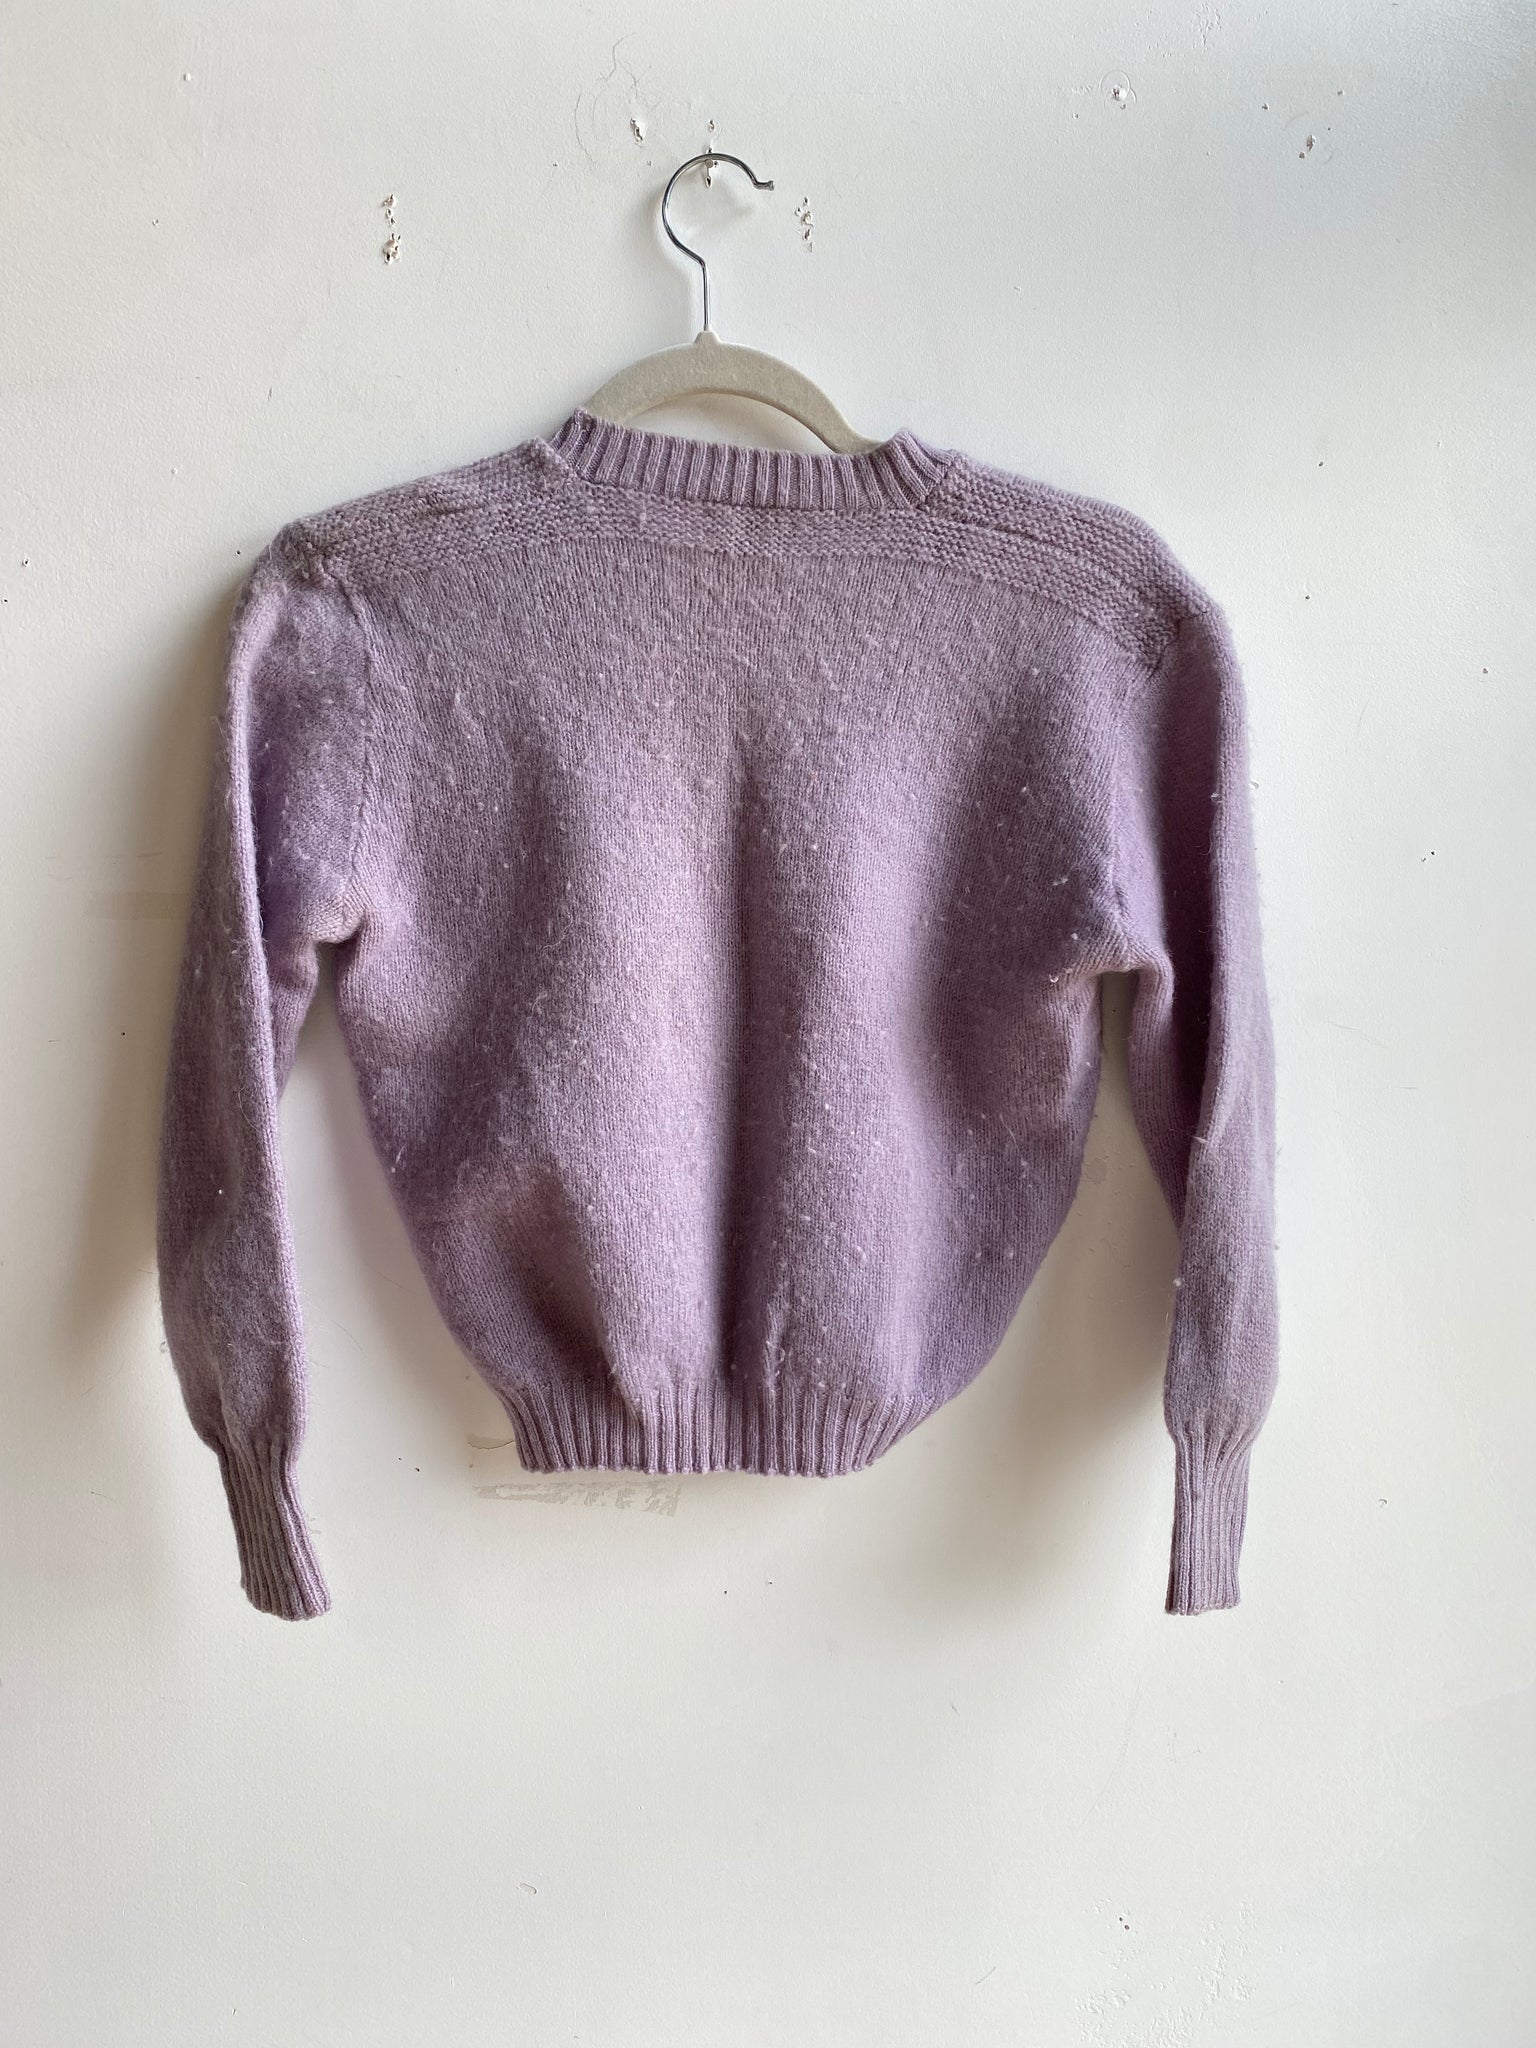 50s Lavender "Sears" Wool and Mohair Pullover